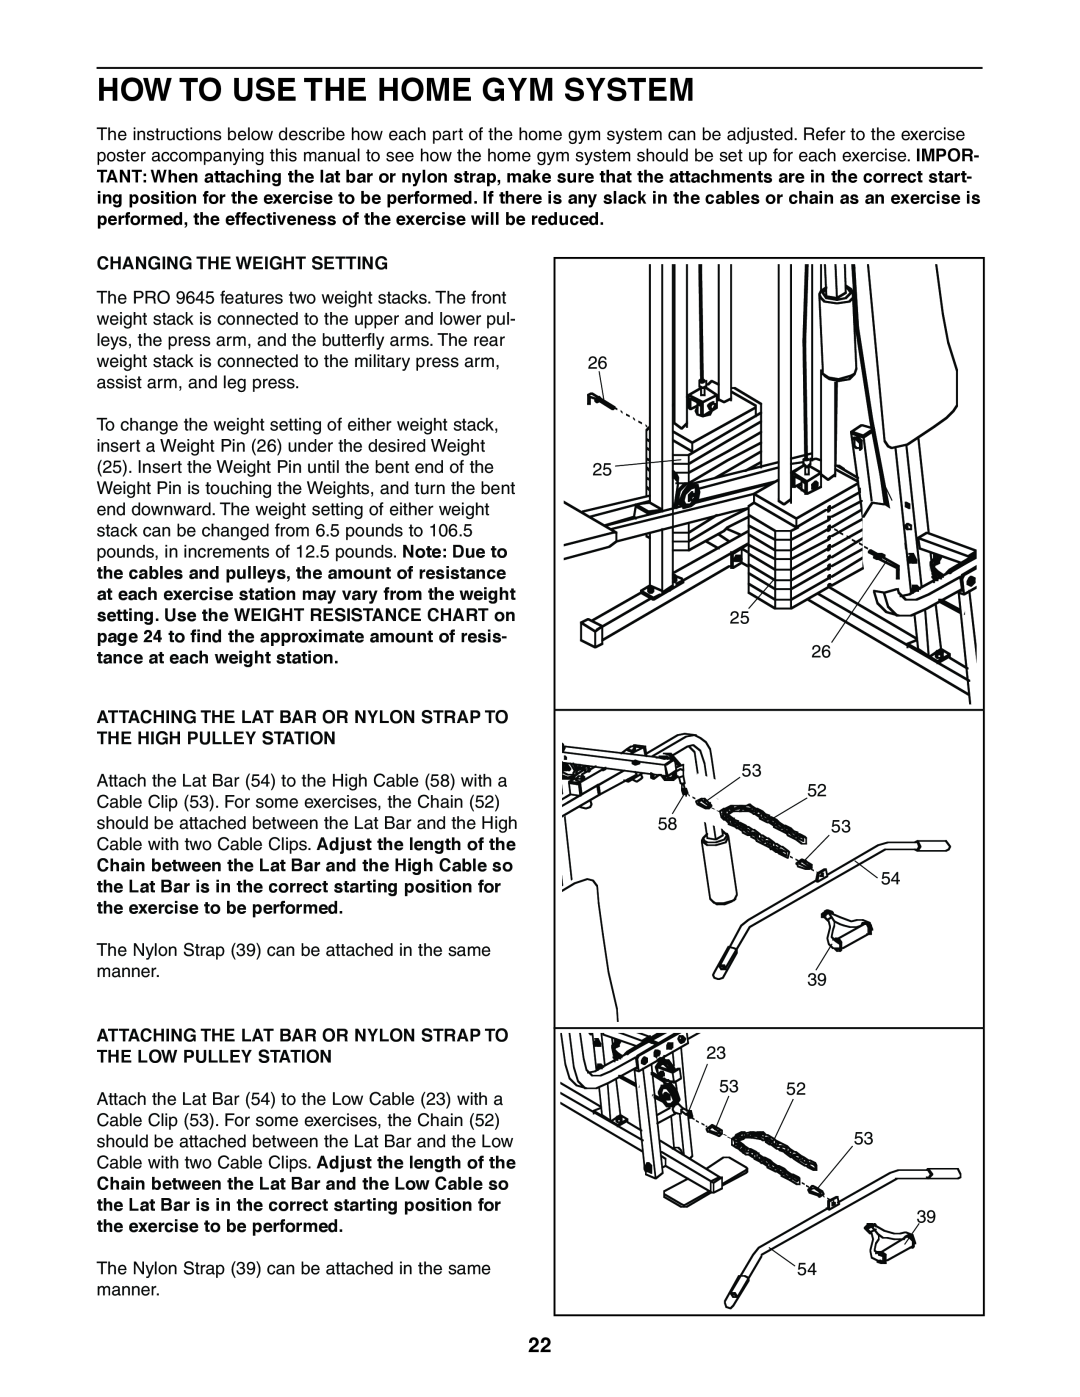 Weider 831.159380 user manual How To Use The Home Gym System, Changing The Weight Setting 